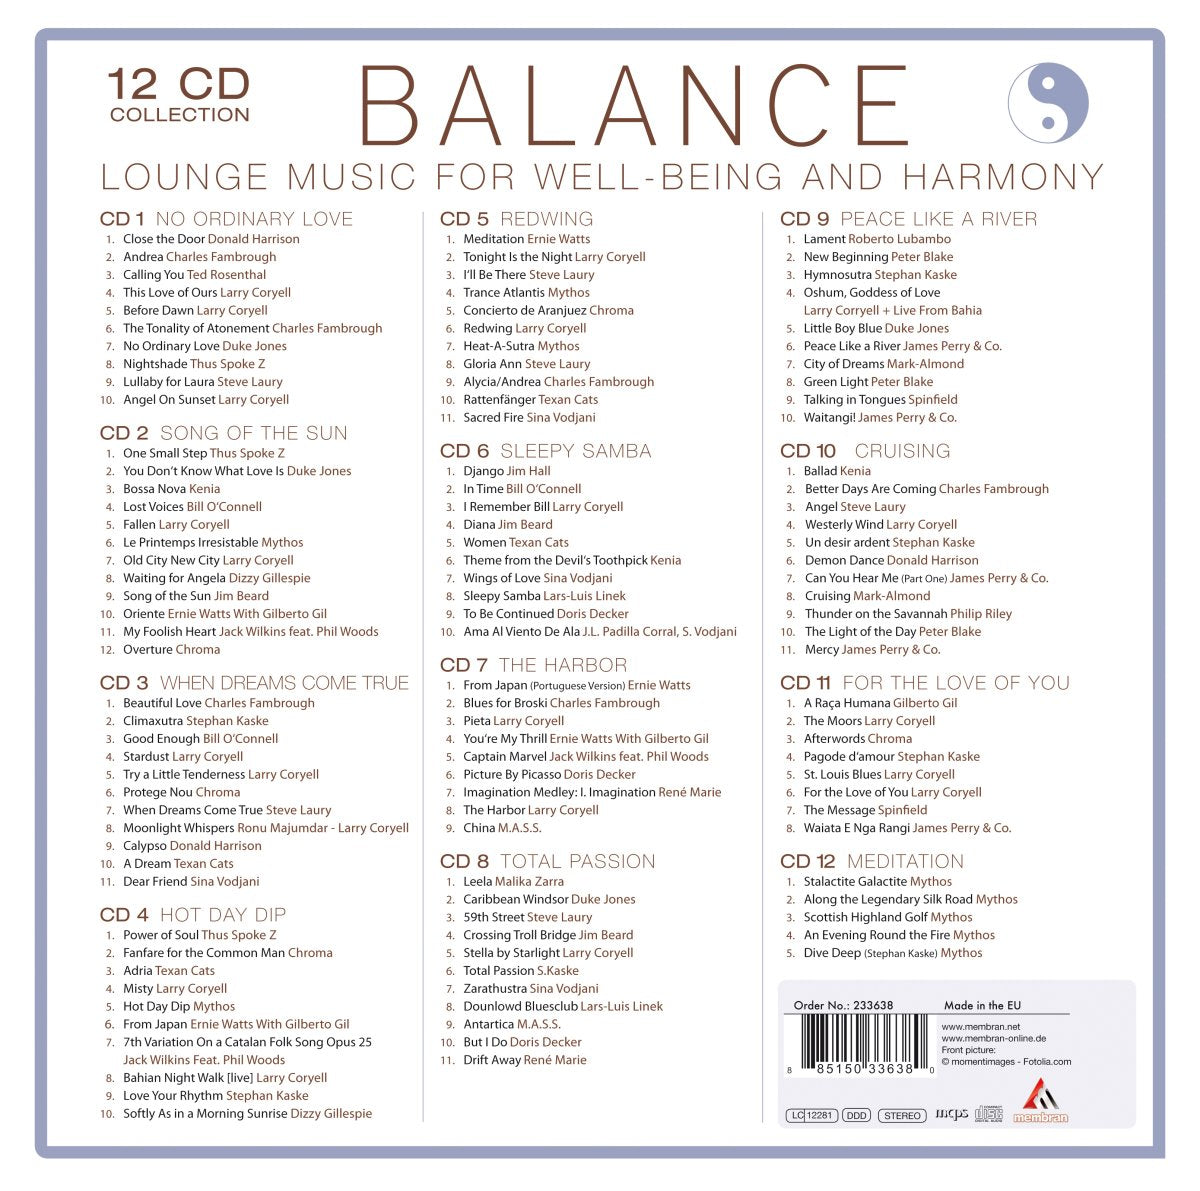 BALANCE: LOUNGE MUSIC FOR WELL-BEING AND HARMONY (12 CDS)